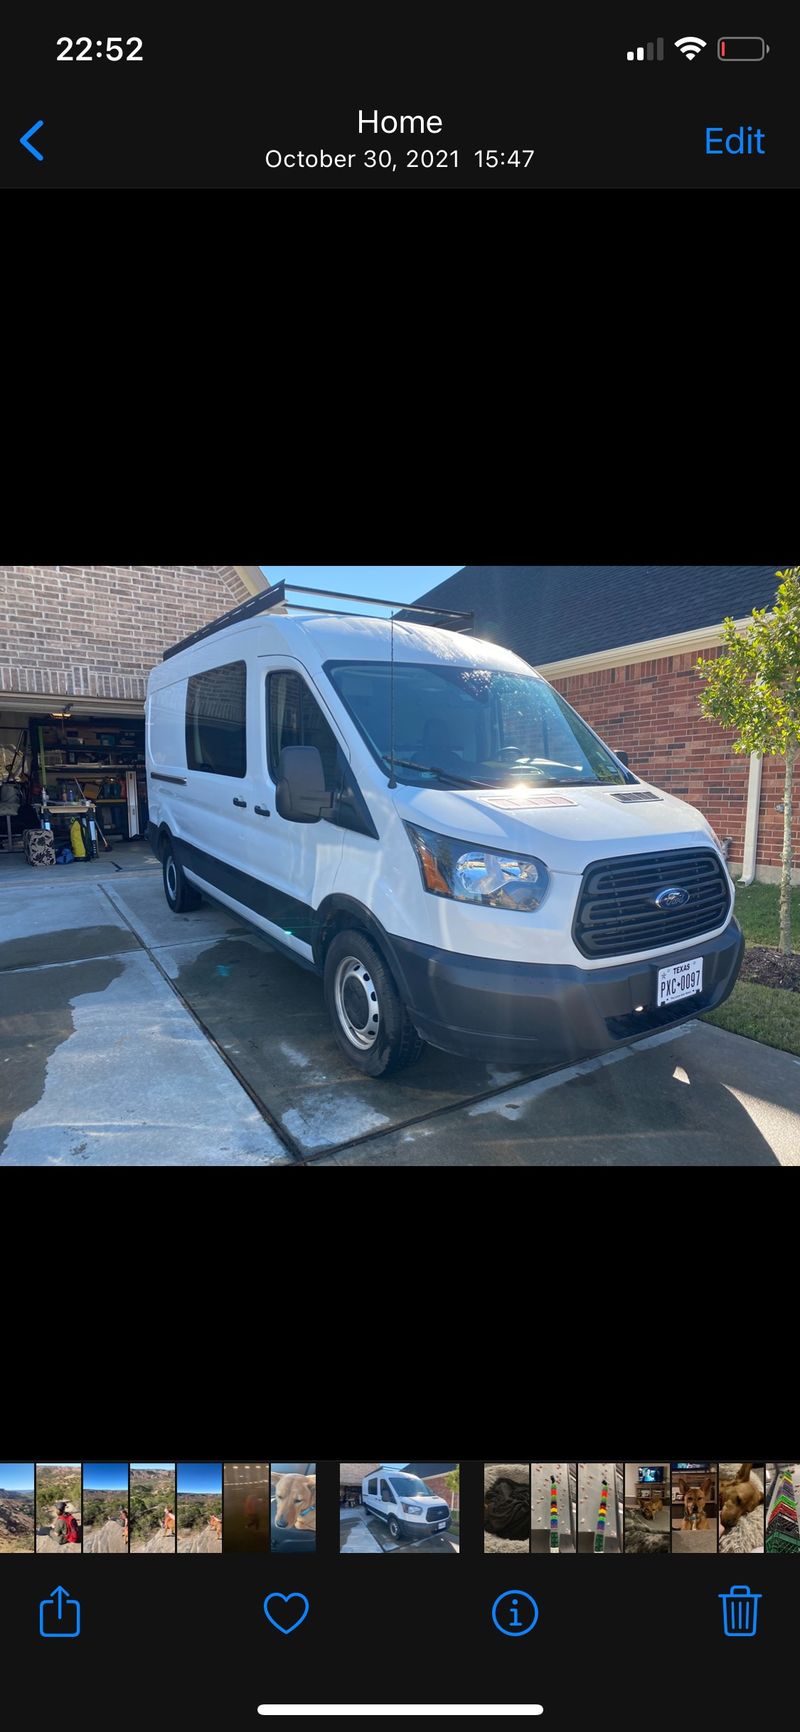 Picture 2/9 of a 2019 Ford Transit 250 for sale in Spring, Texas